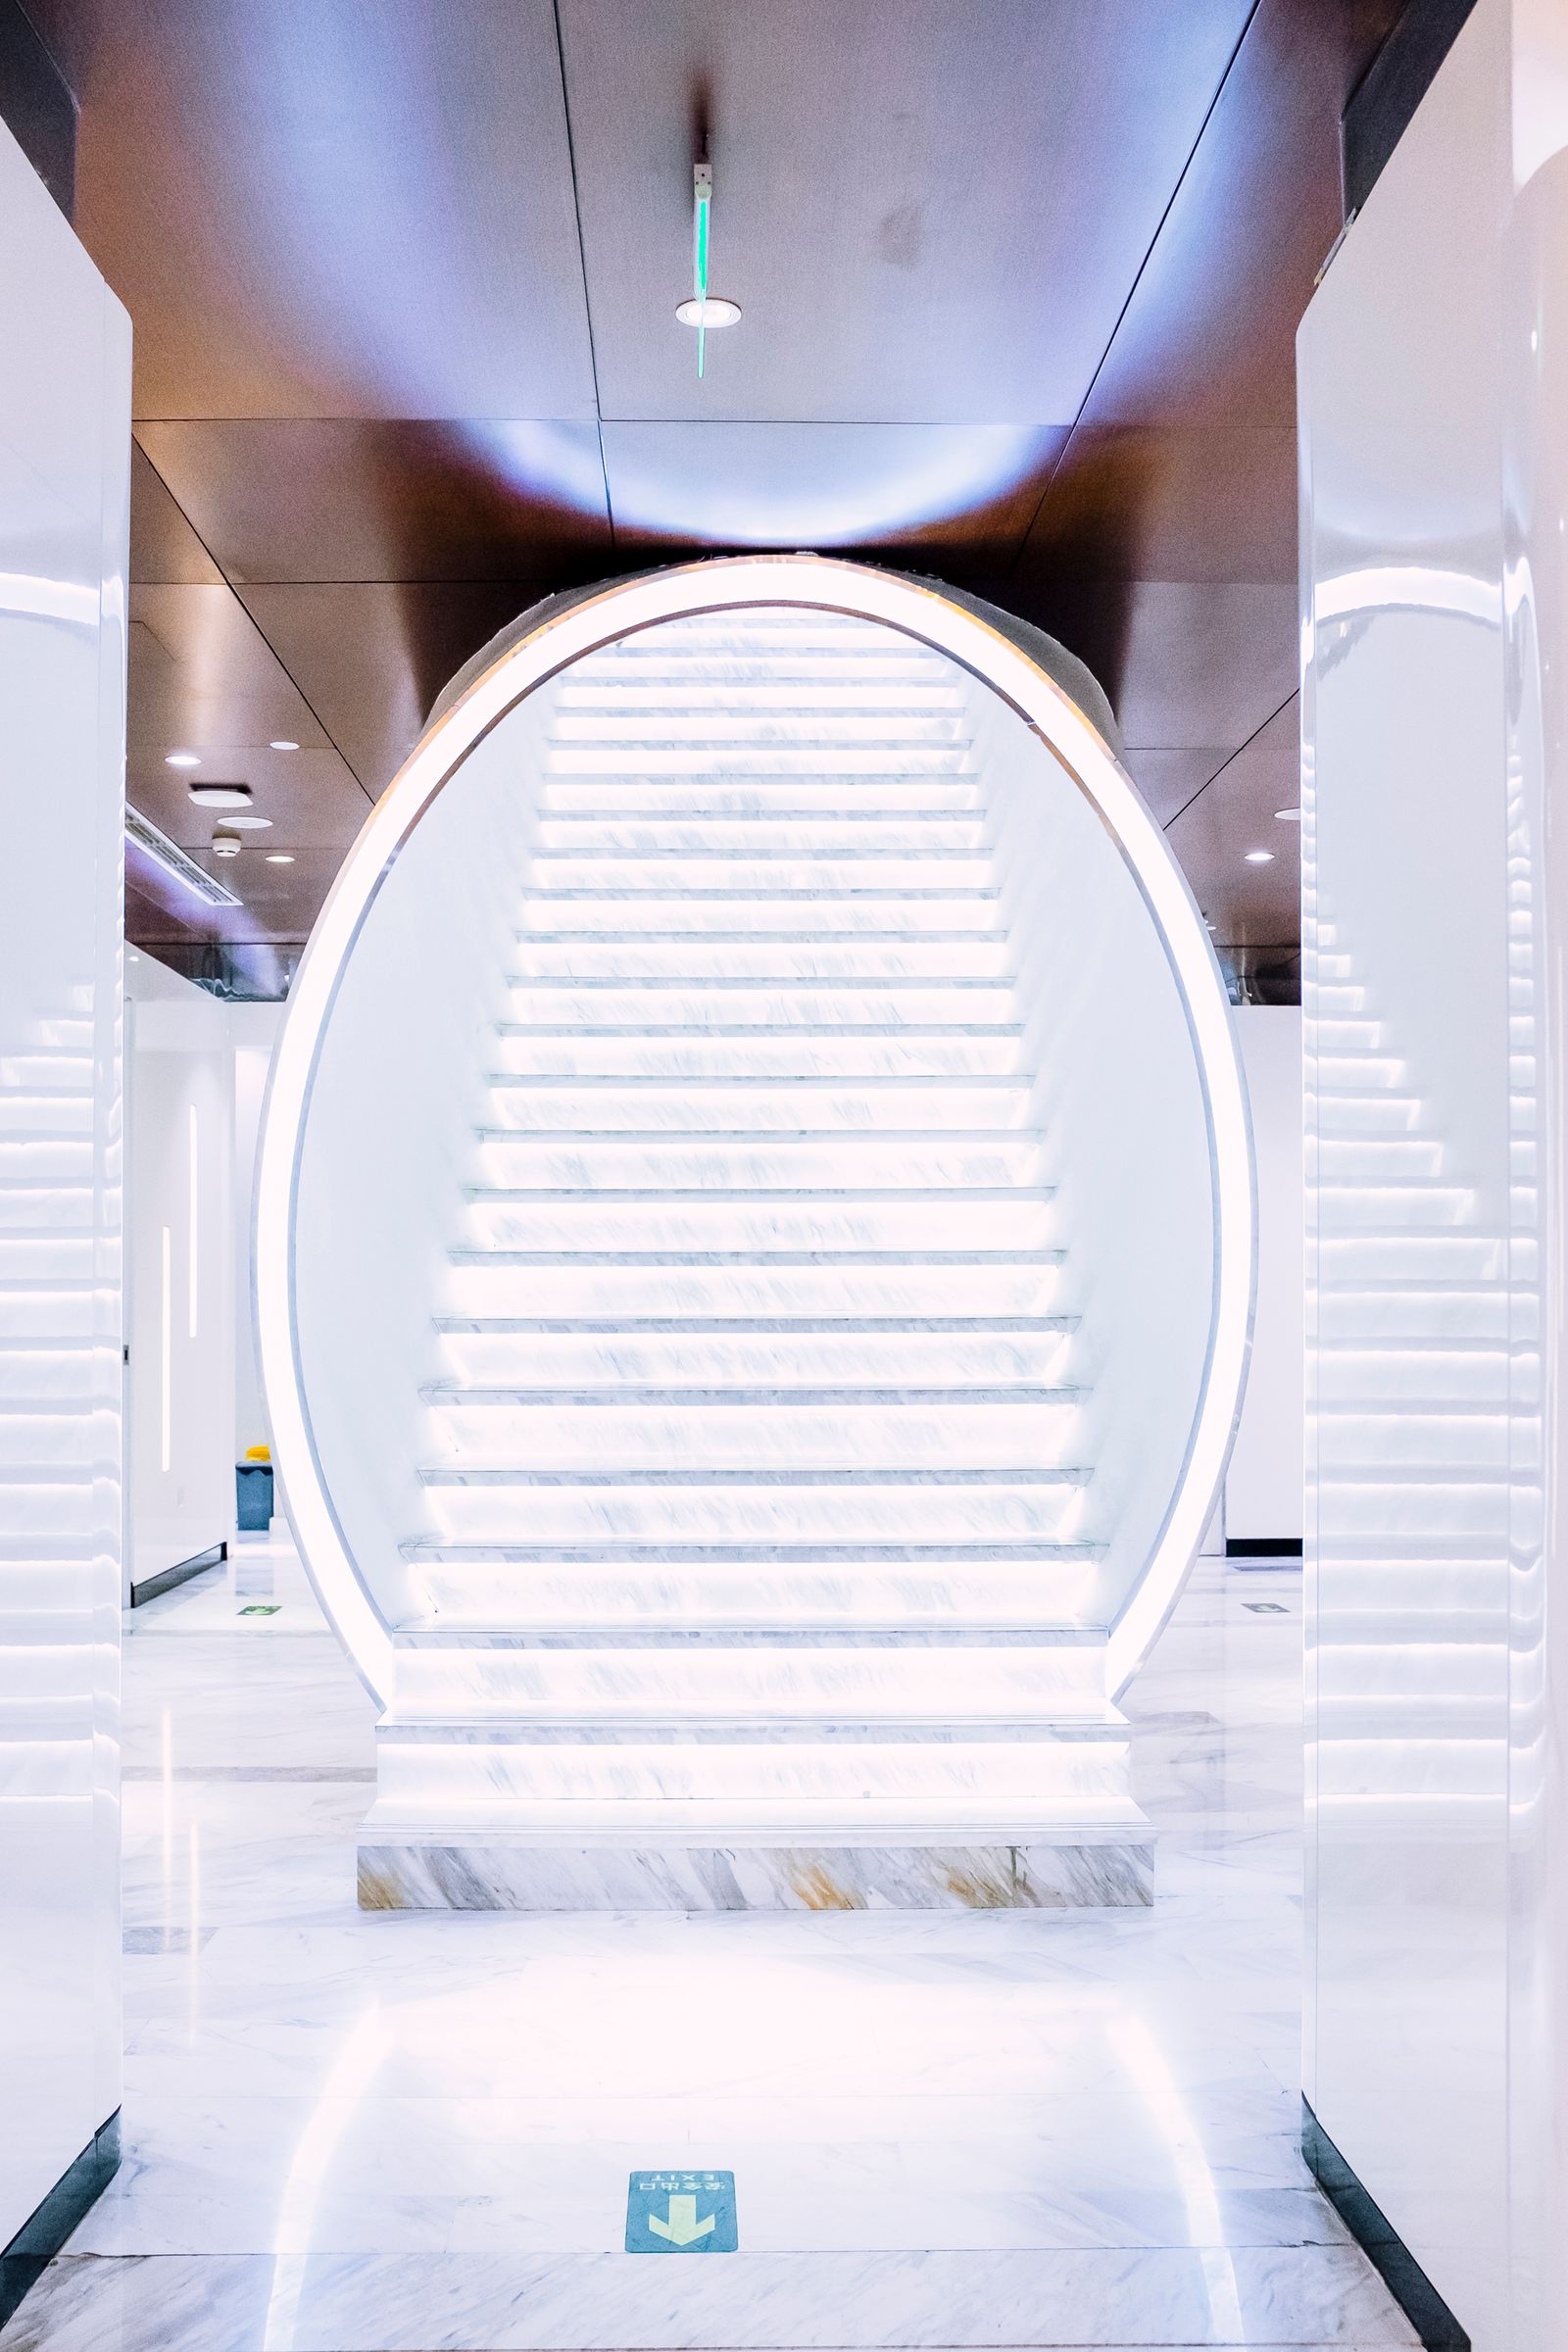 © Yufan Lu - A staircase nicknamed "time tunnel" at a cosmetic surgery, Beijing, China